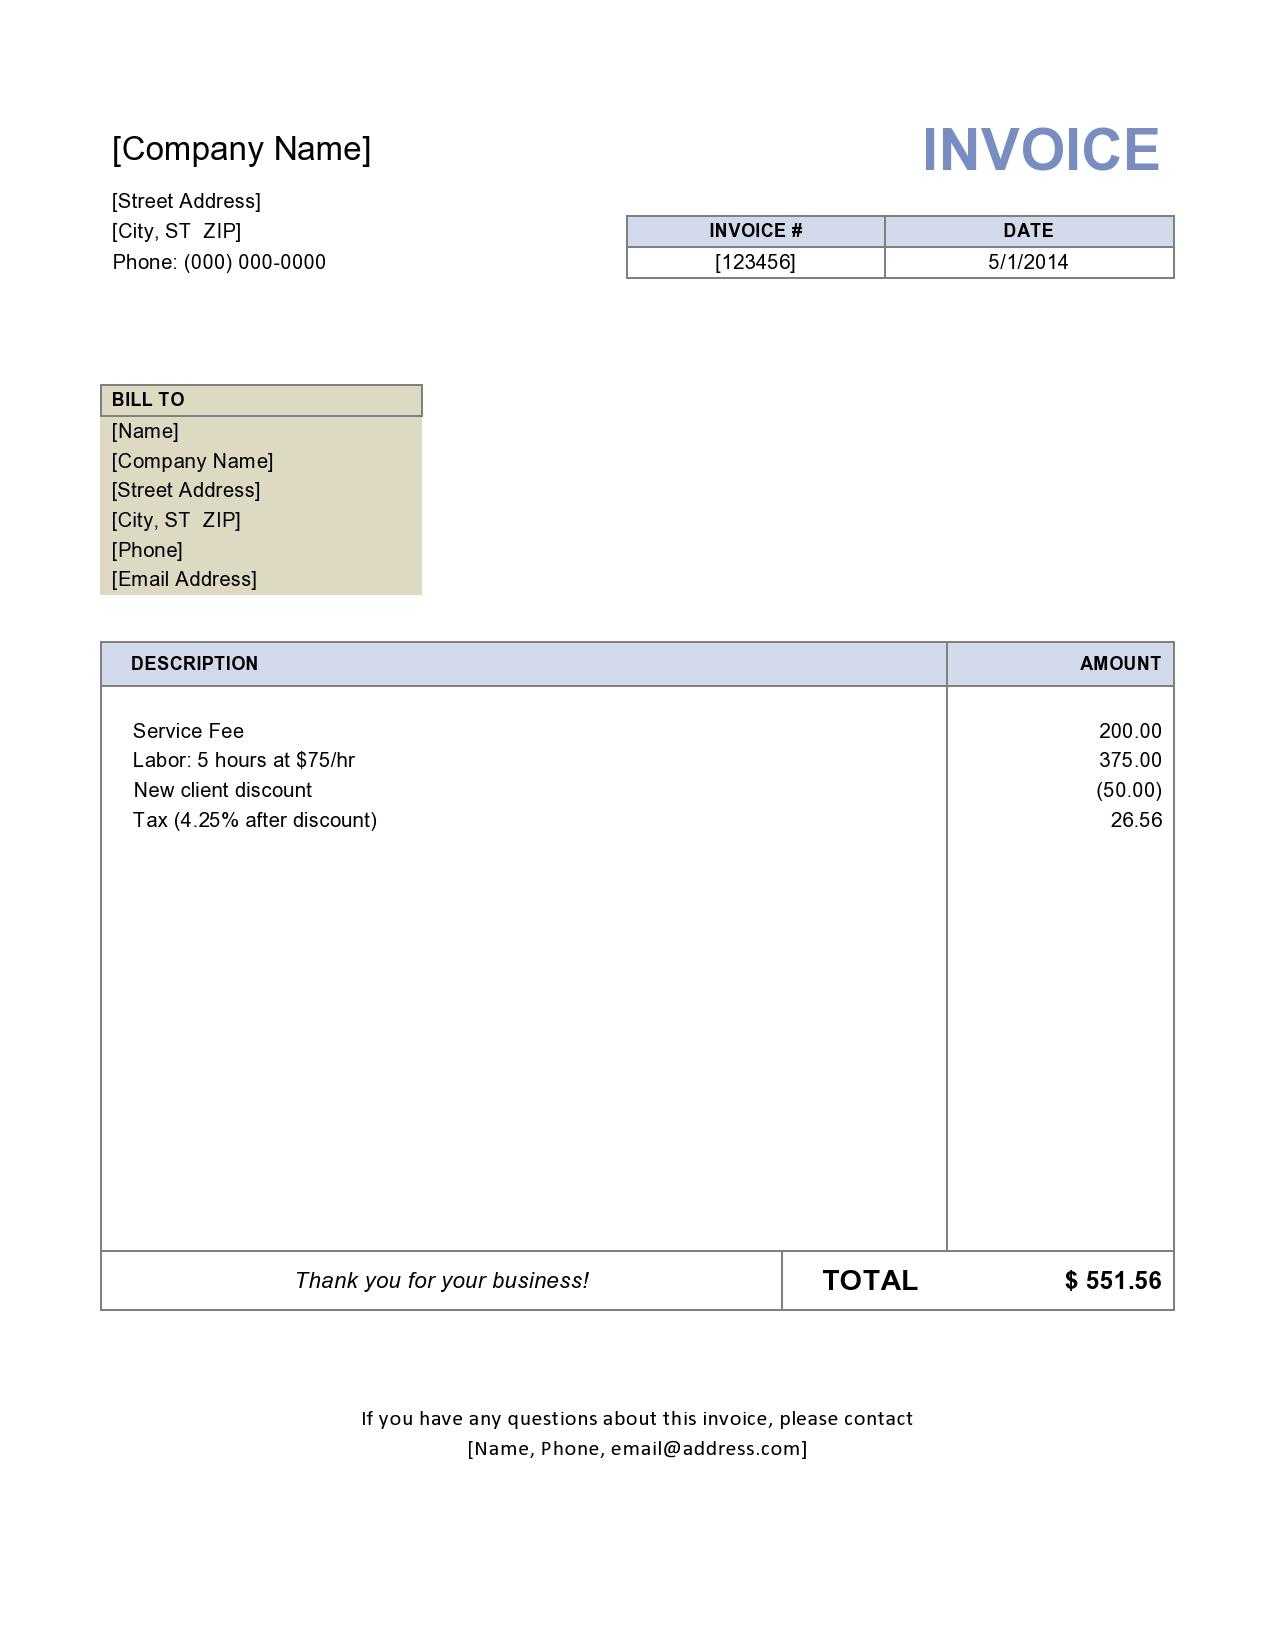 Invoice Template Free | Small Business Invoice Template Inside Free Invoice Template Word Mac